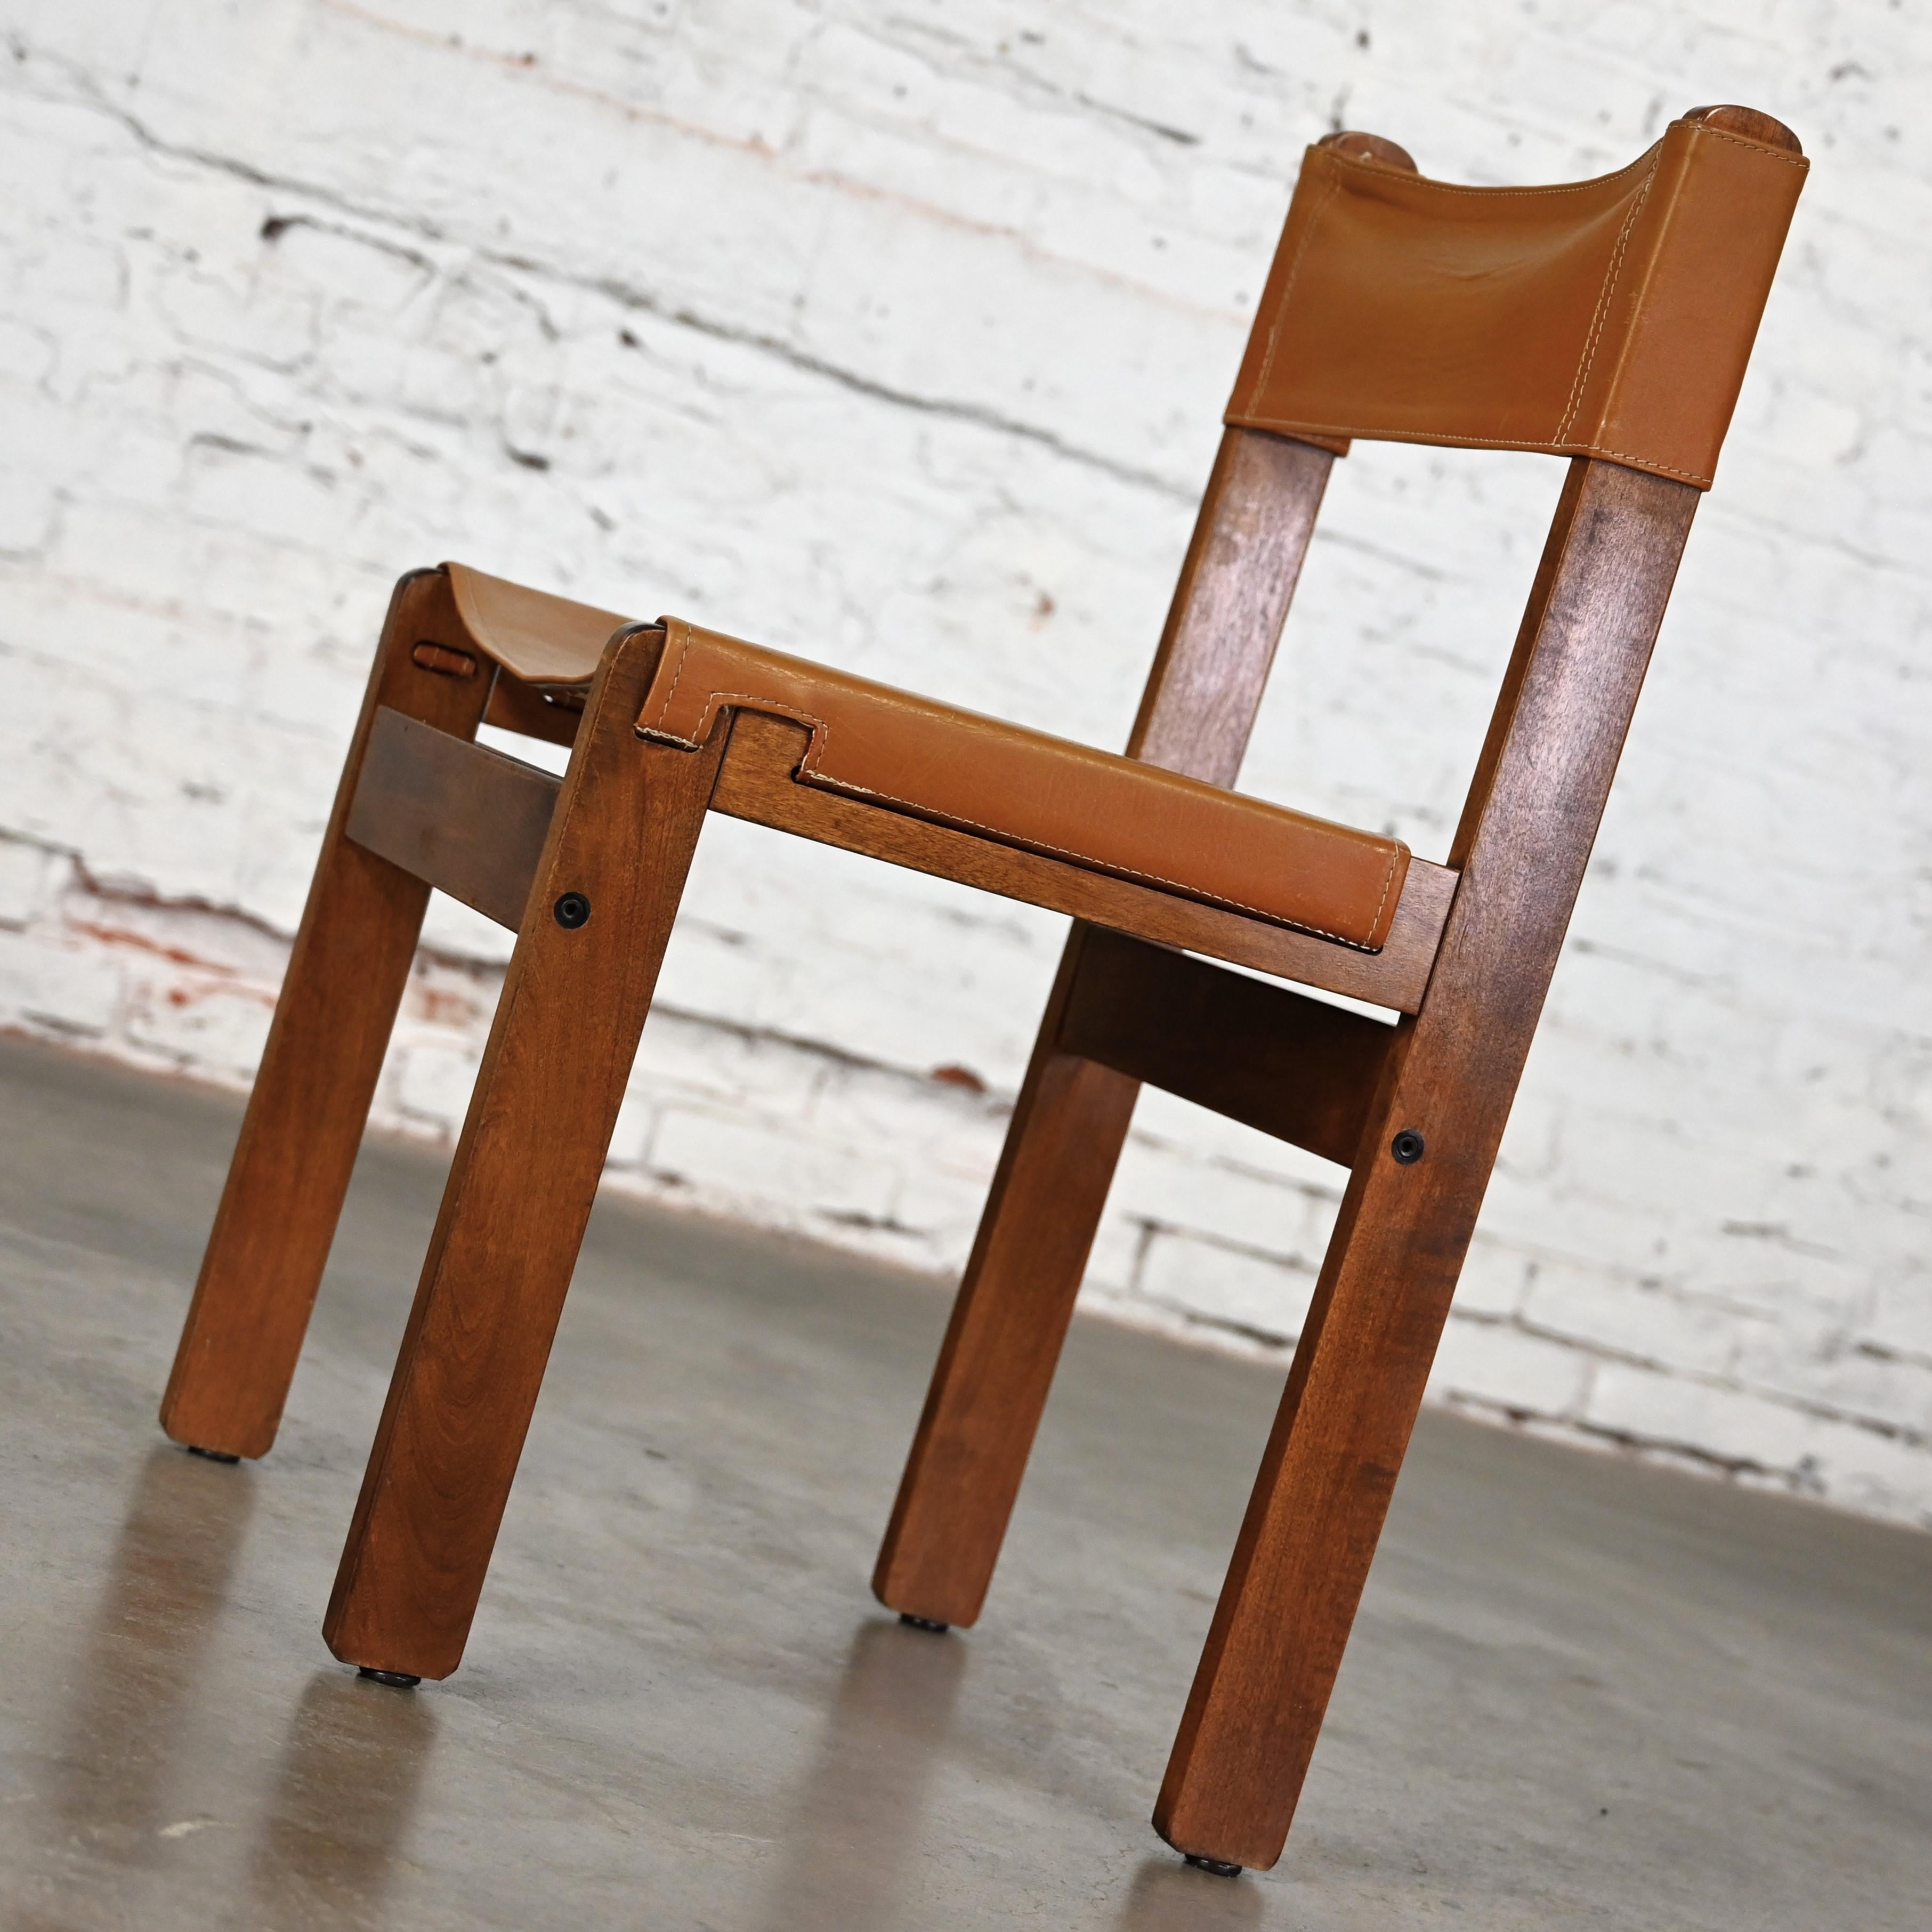 Hardwood 1970’s Modern Sling Chair Teak & Leather Style Michel Arnoult Made in Argentina For Sale